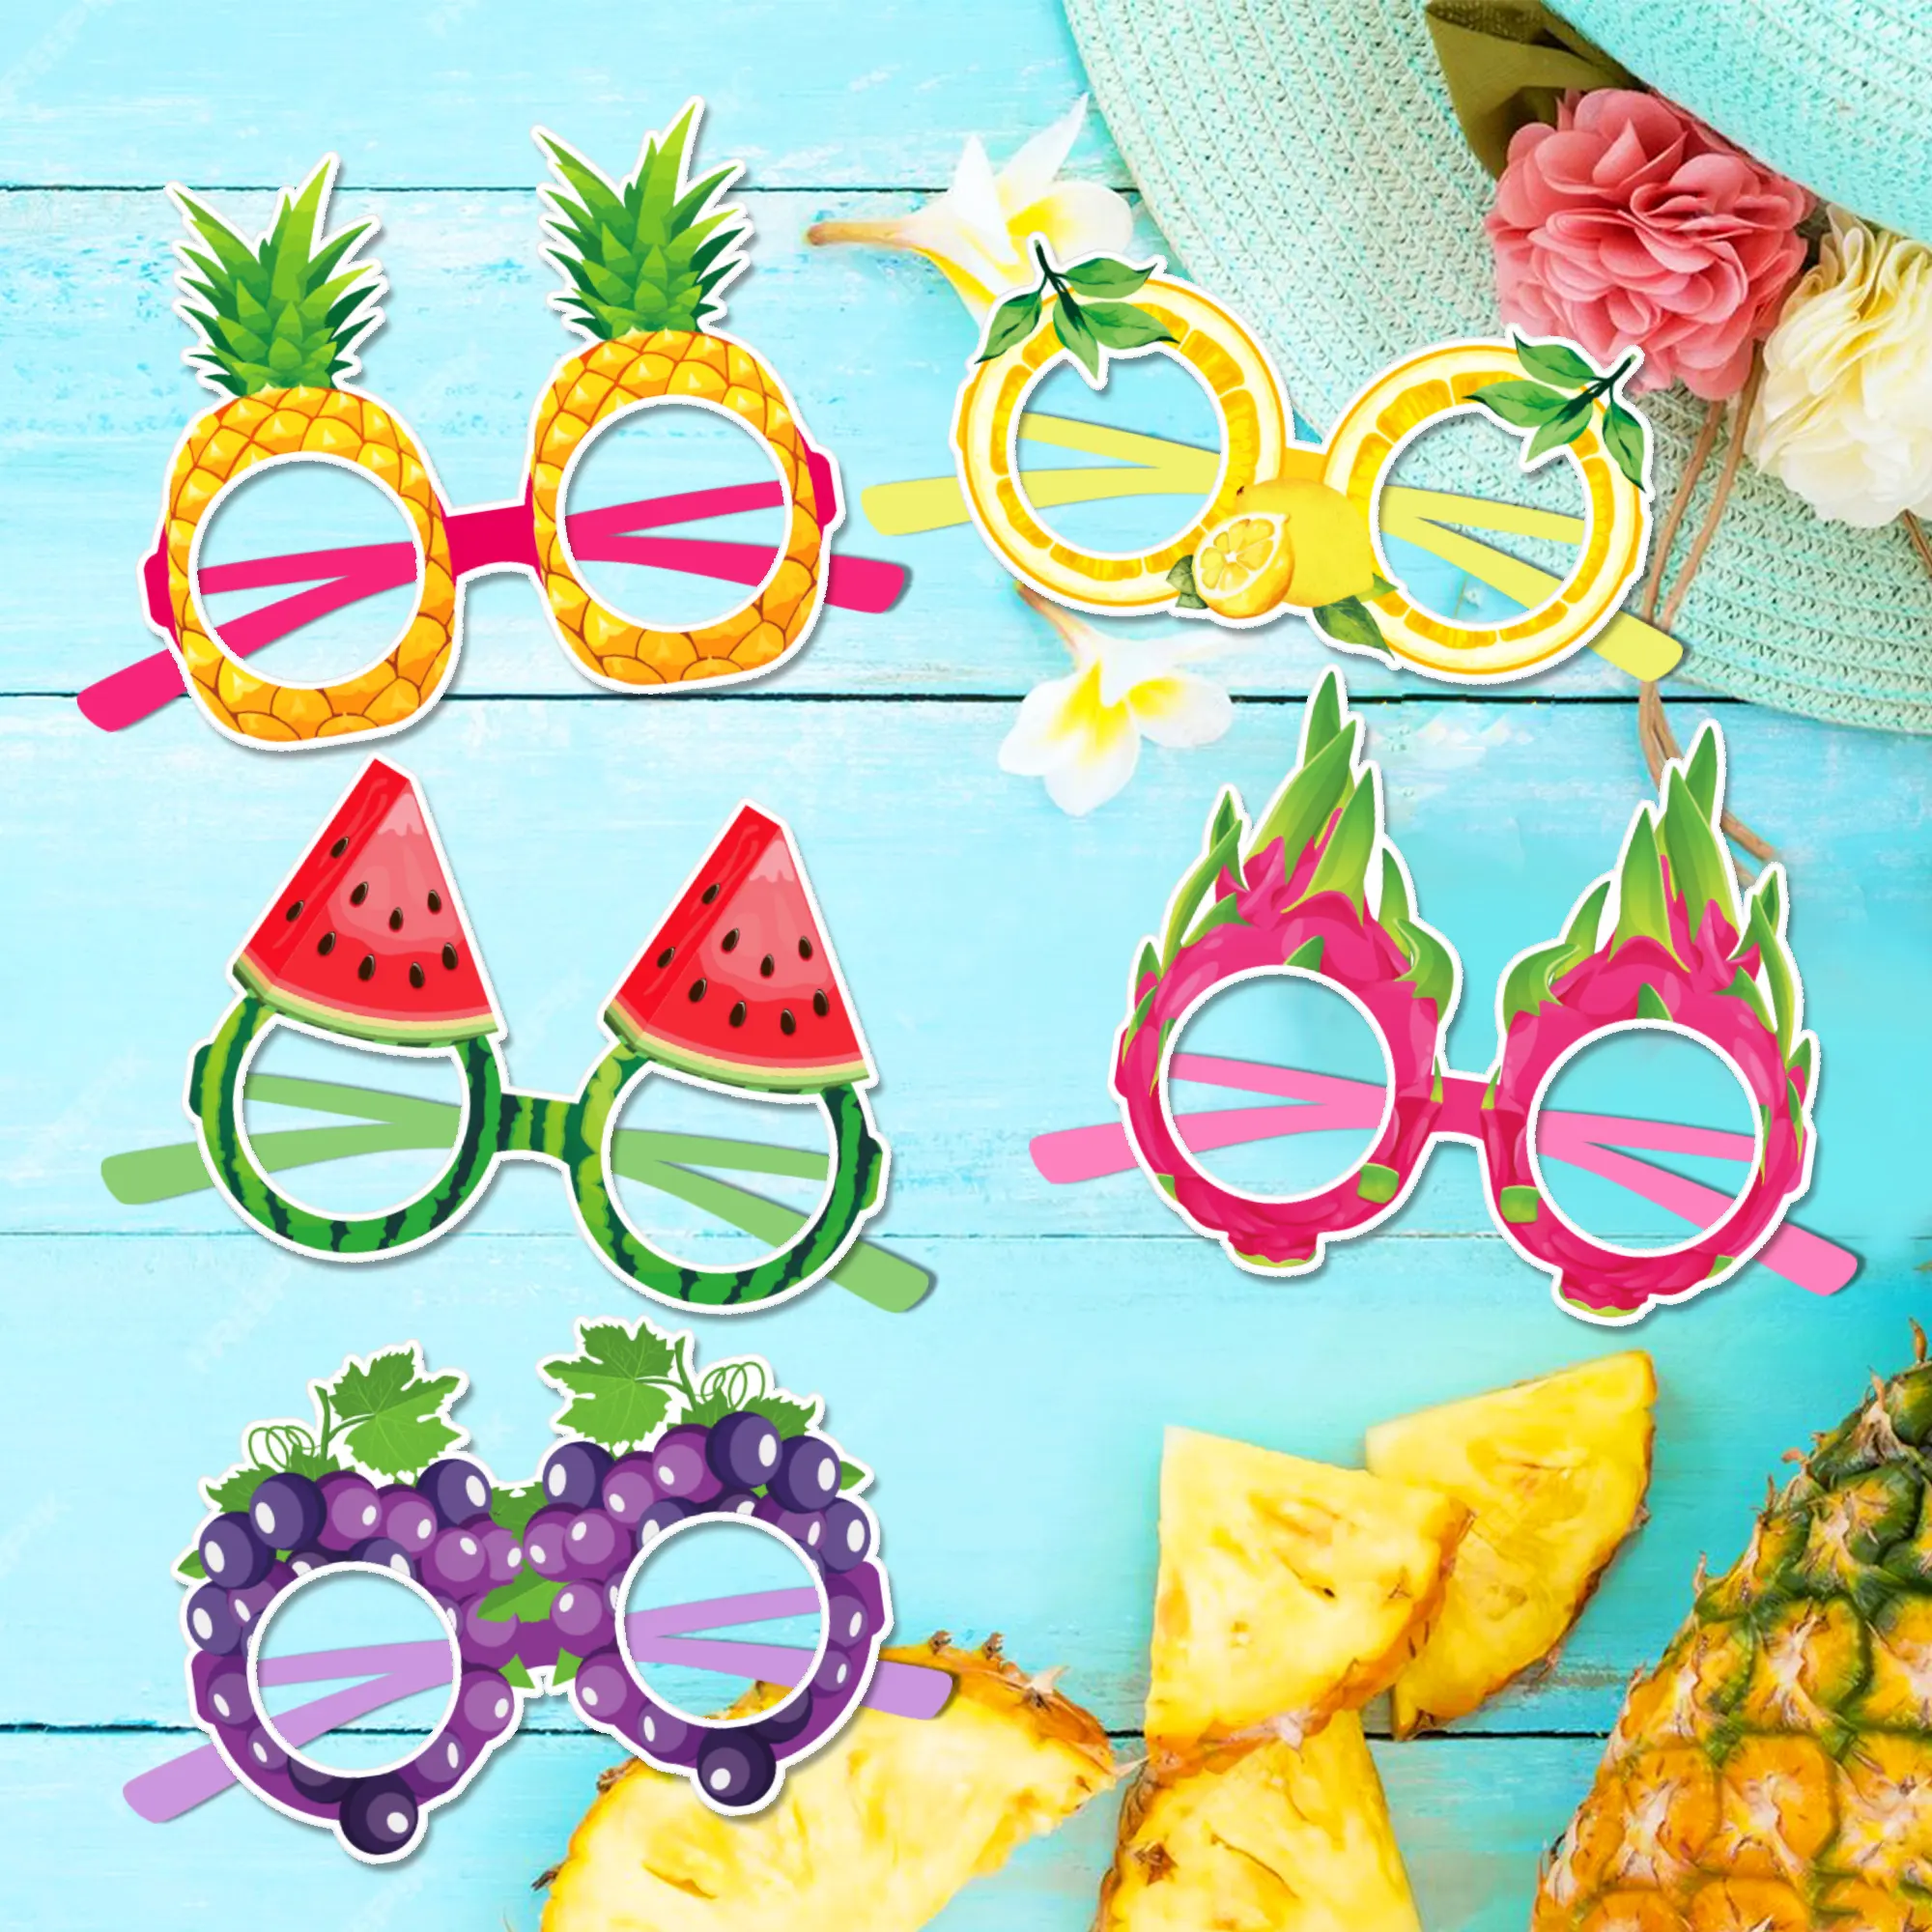 MJ047 Summer Theme Fruit Paper Glasses Tropical Fruit Glasses for Hawaii Beach Party KIds Glasses Decoration